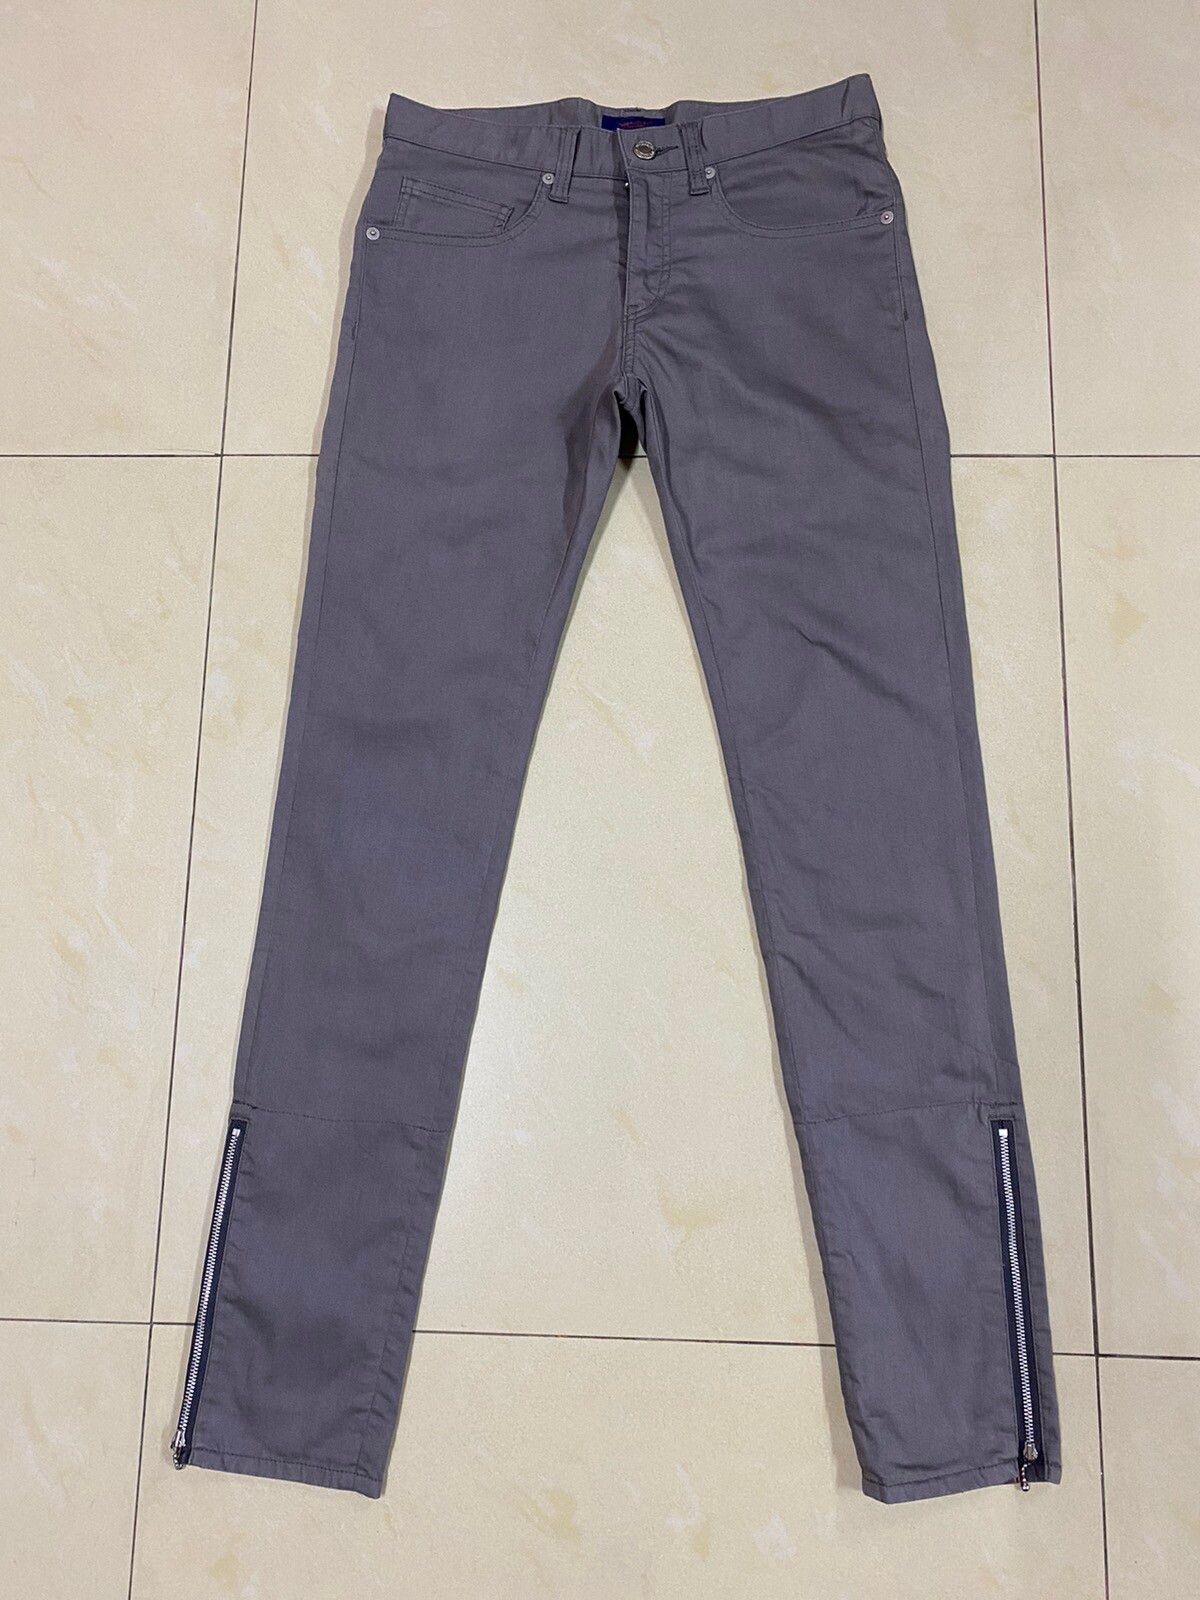 Undercover Undercover Jun Takahashi Pants | Grailed